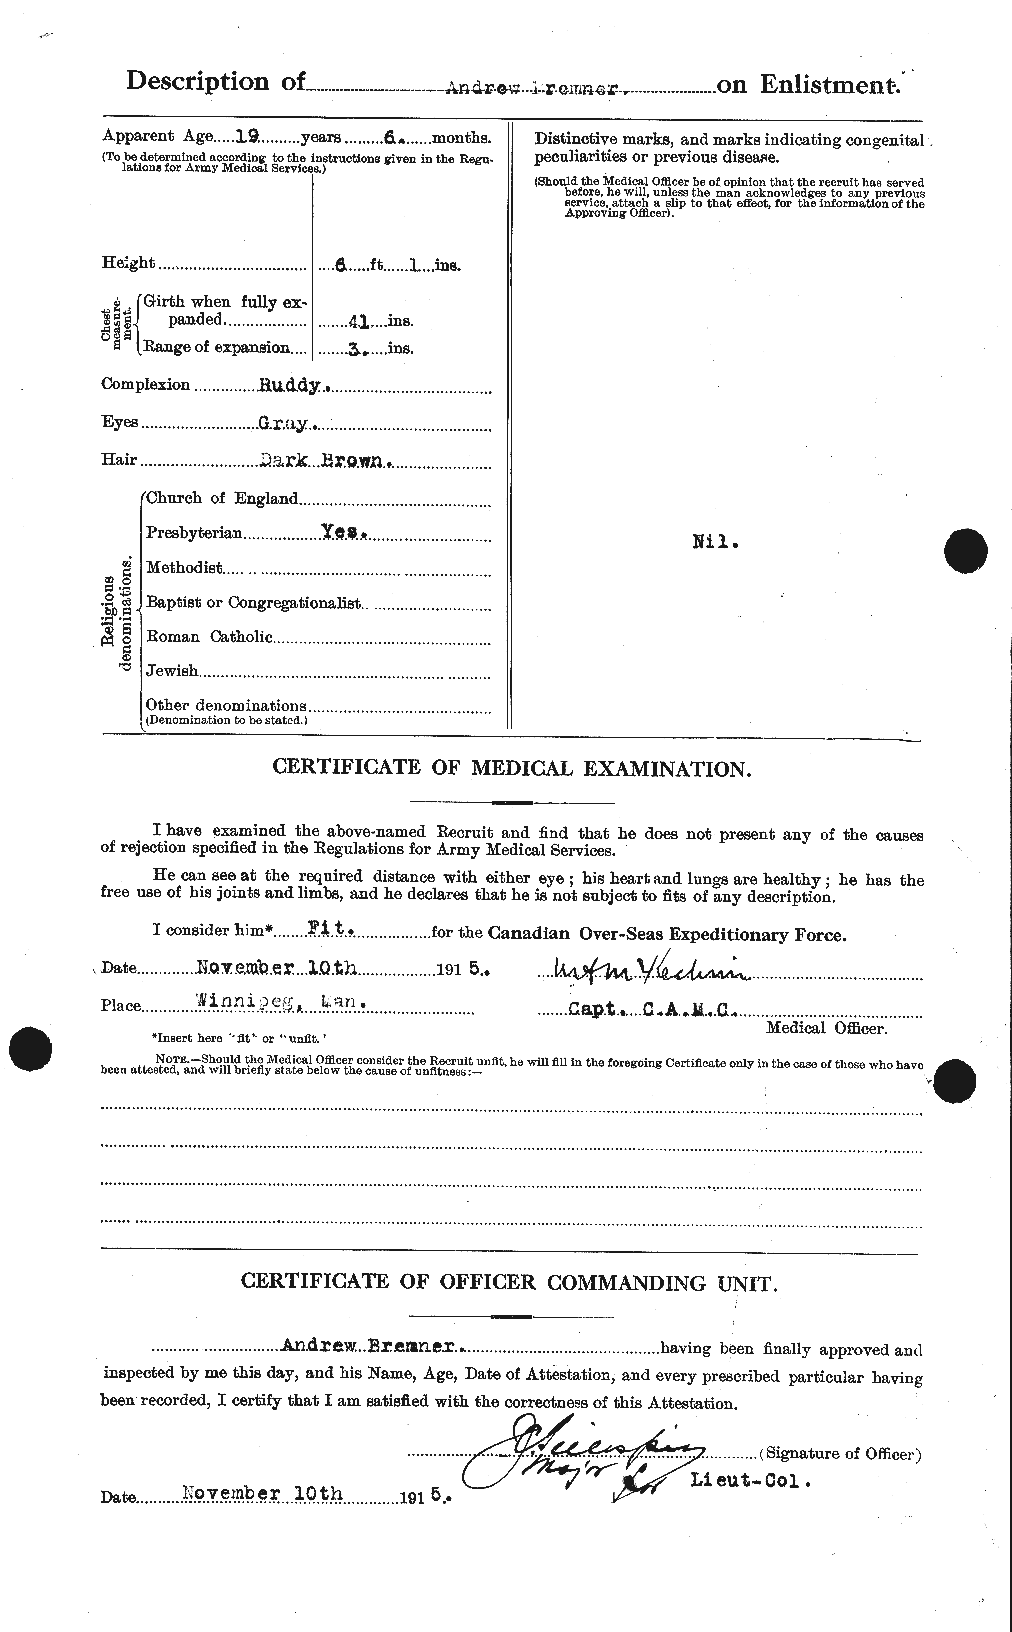 Personnel Records of the First World War - CEF 263664b